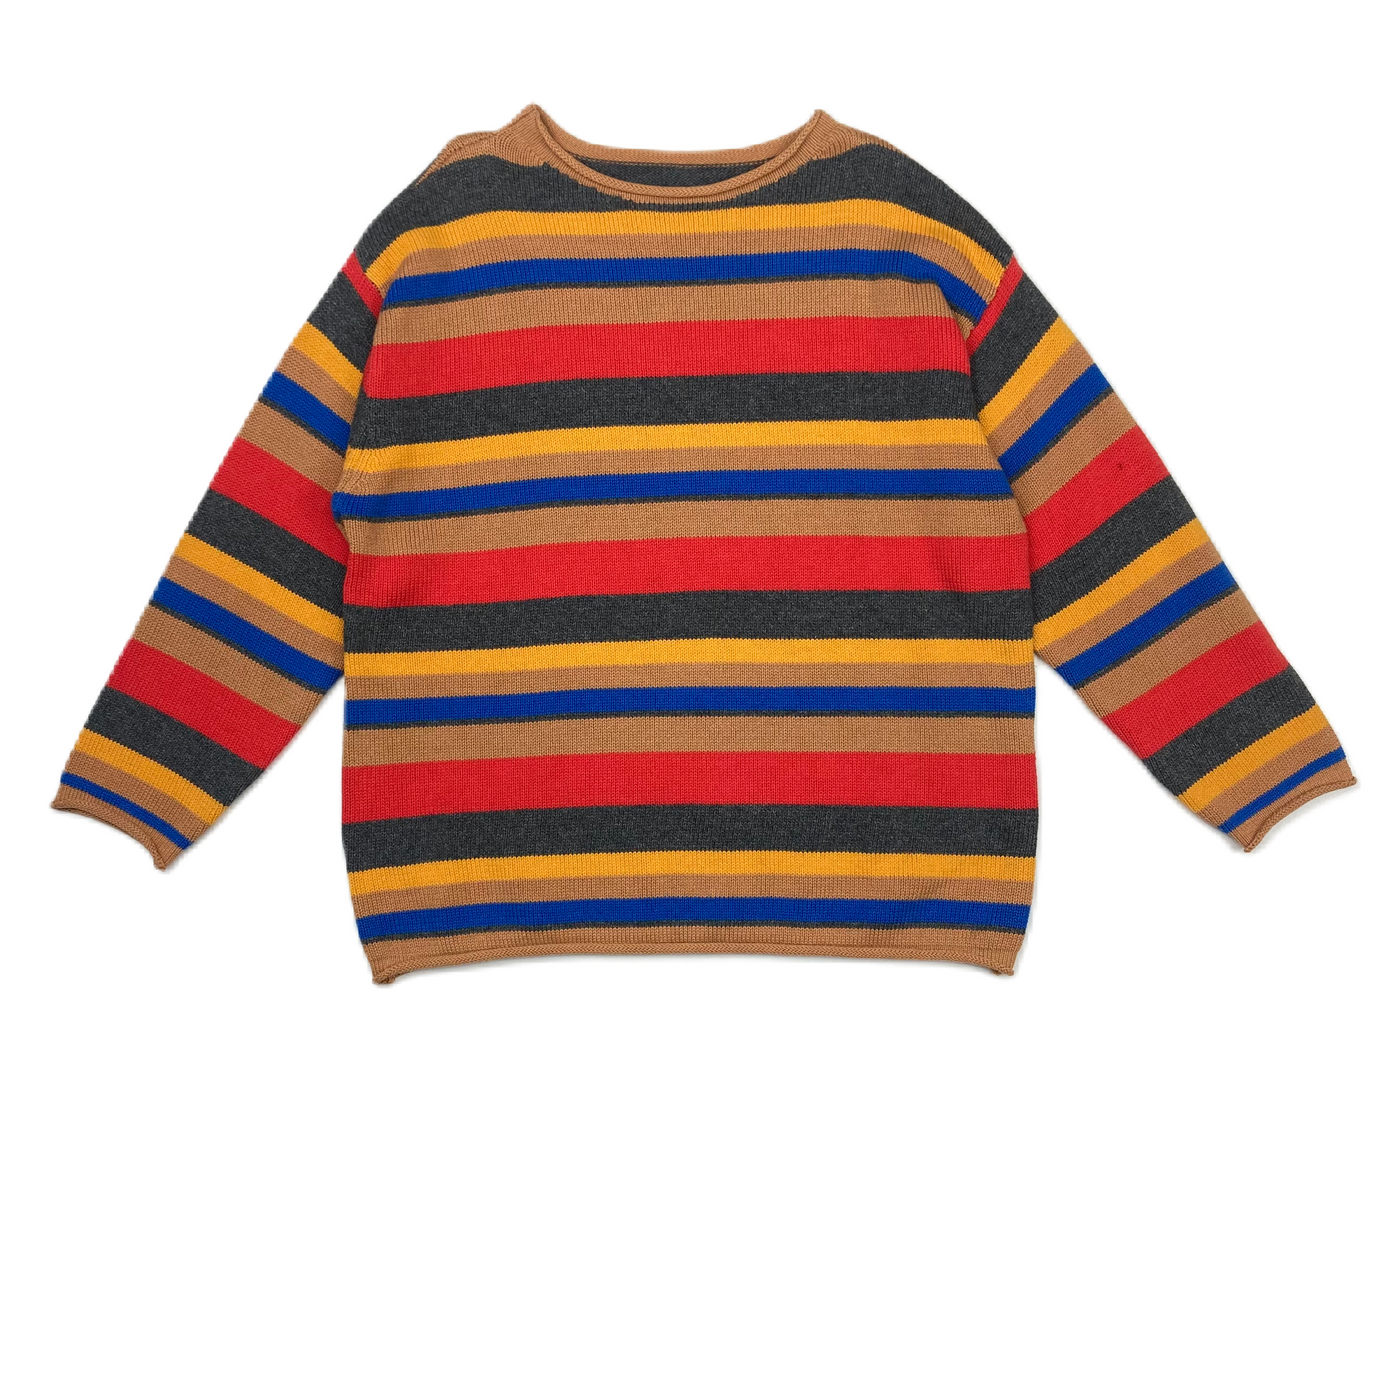 Repose Ams. - Knitted sweater stripes 8y